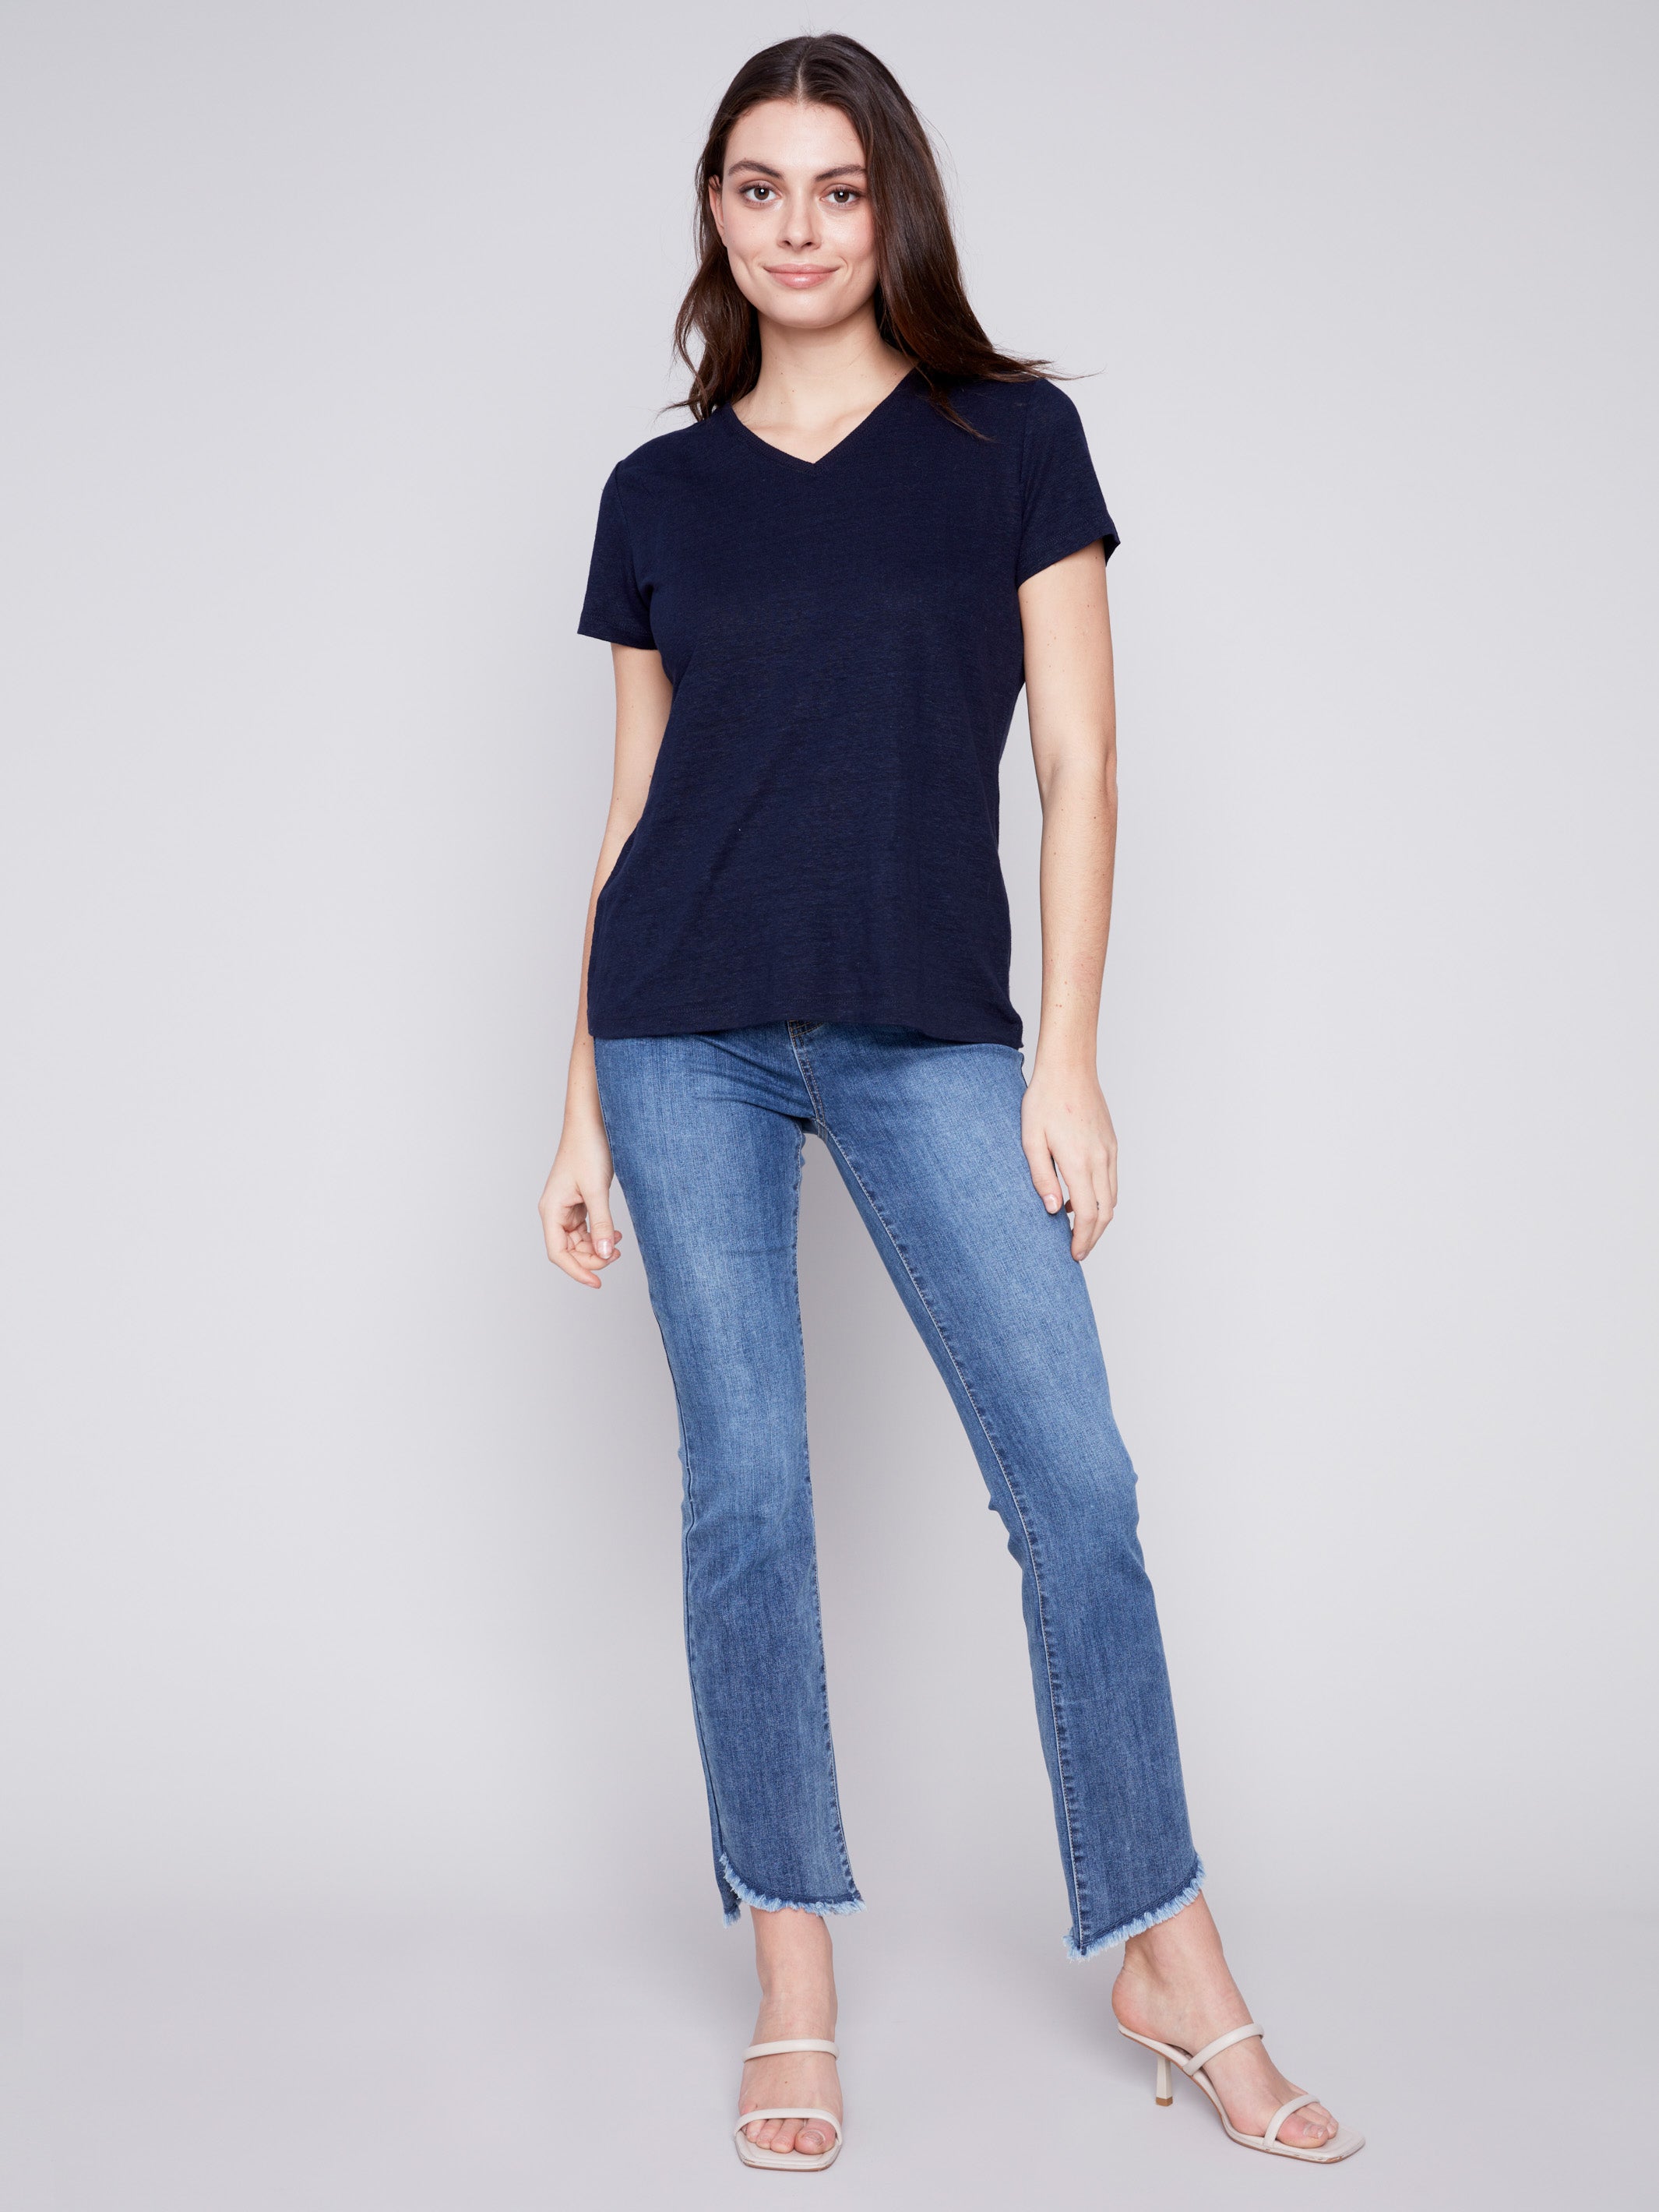 V-Neck Linen T-Shirt - Navy - Charlie B Collection Canada - Image 3